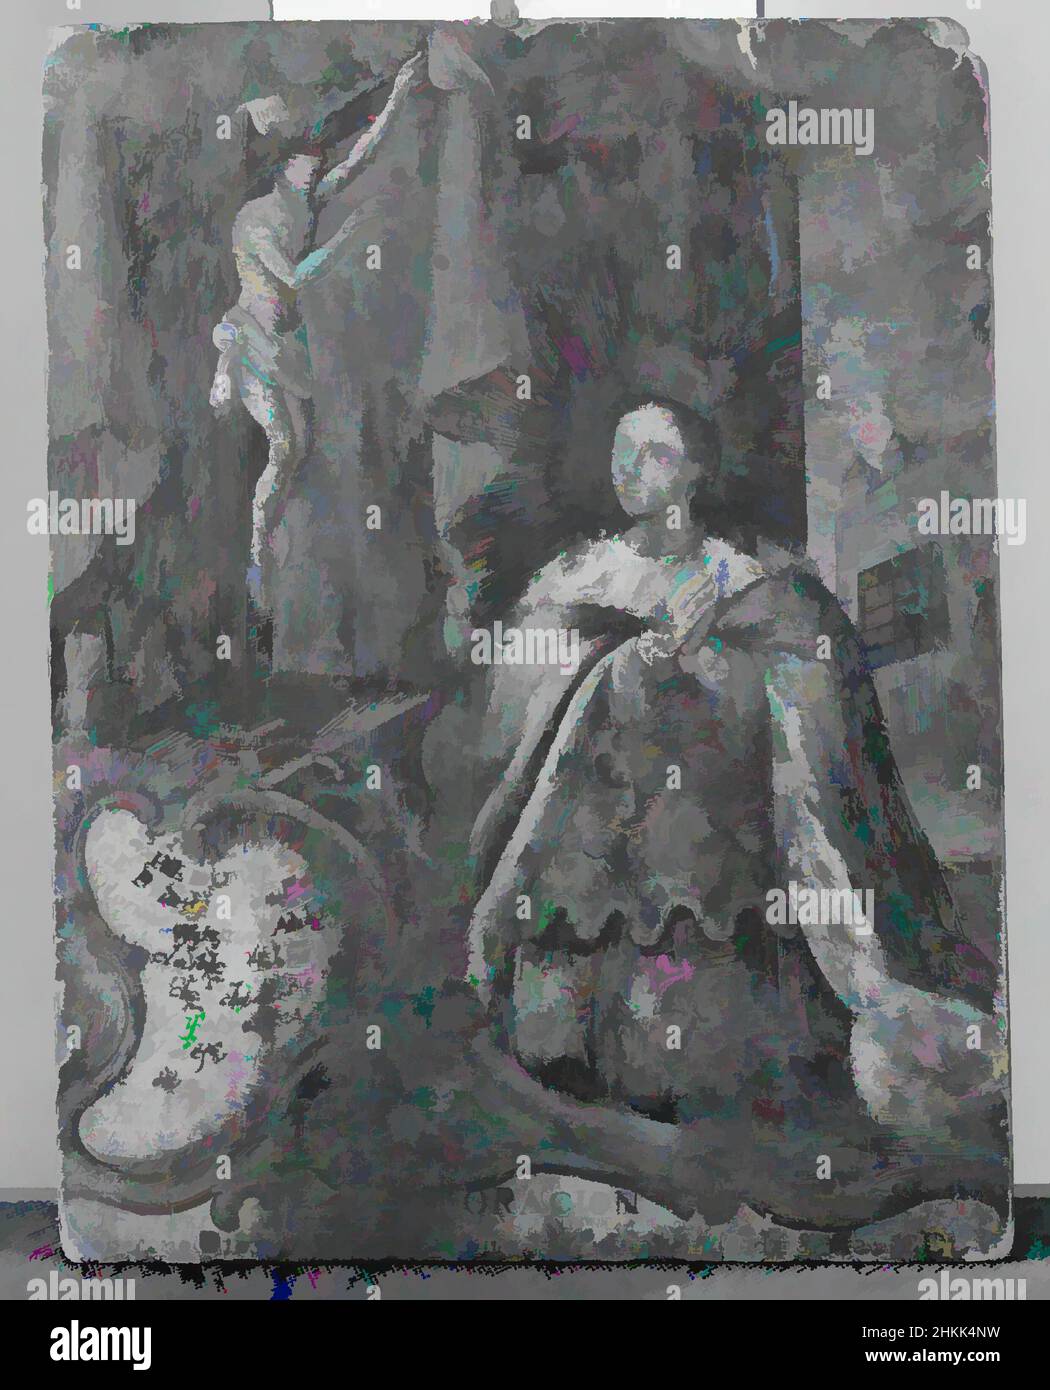 Art inspired by Queen Kneeling Before Cross, Painting on wood, late 18th-early 19th century, 7 11/16 x 5 15/16 in., 19.5 x 15.1 cm, Christ, cross, crucifiction, crucifix, ermine, female, holy, humble, Jesus, kneeling figure, monarch, painting, prayer, praying, queen, religious, robe, Classic works modernized by Artotop with a splash of modernity. Shapes, color and value, eye-catching visual impact on art. Emotions through freedom of artworks in a contemporary way. A timeless message pursuing a wildly creative new direction. Artists turning to the digital medium and creating the Artotop NFT Stock Photo